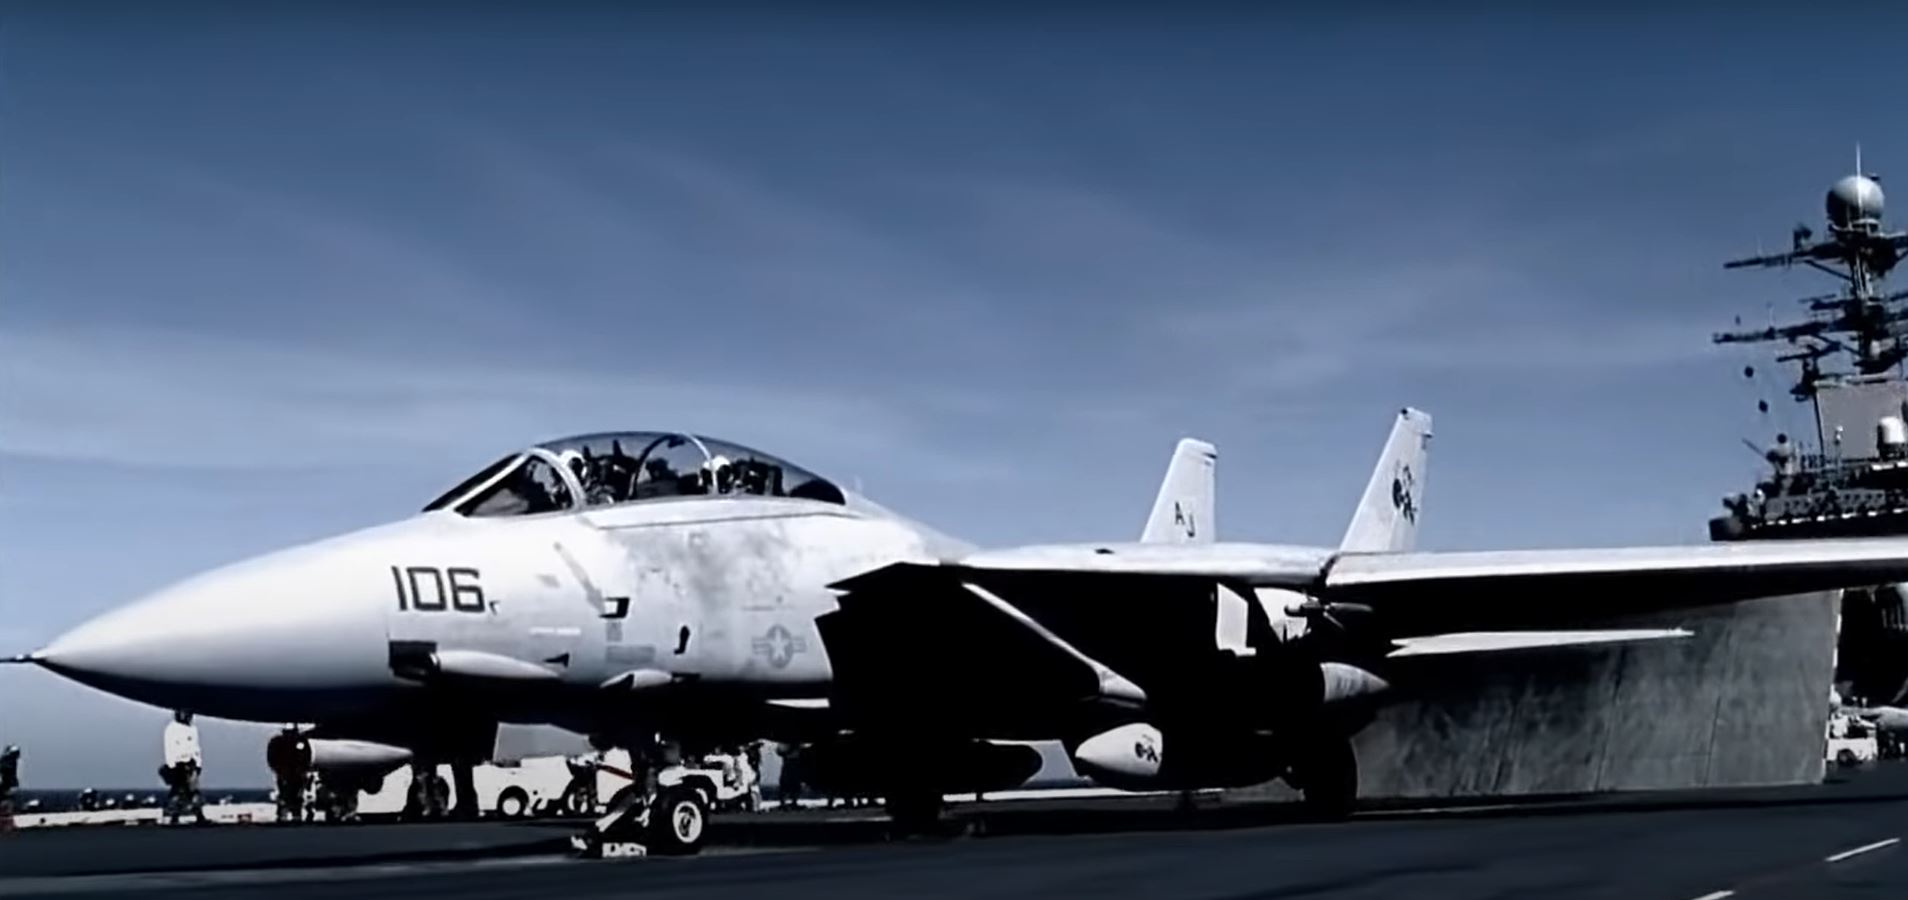 These F-14 Tomcat Videos Will Bring Back Awesome Memories Of Naval Aviation 2